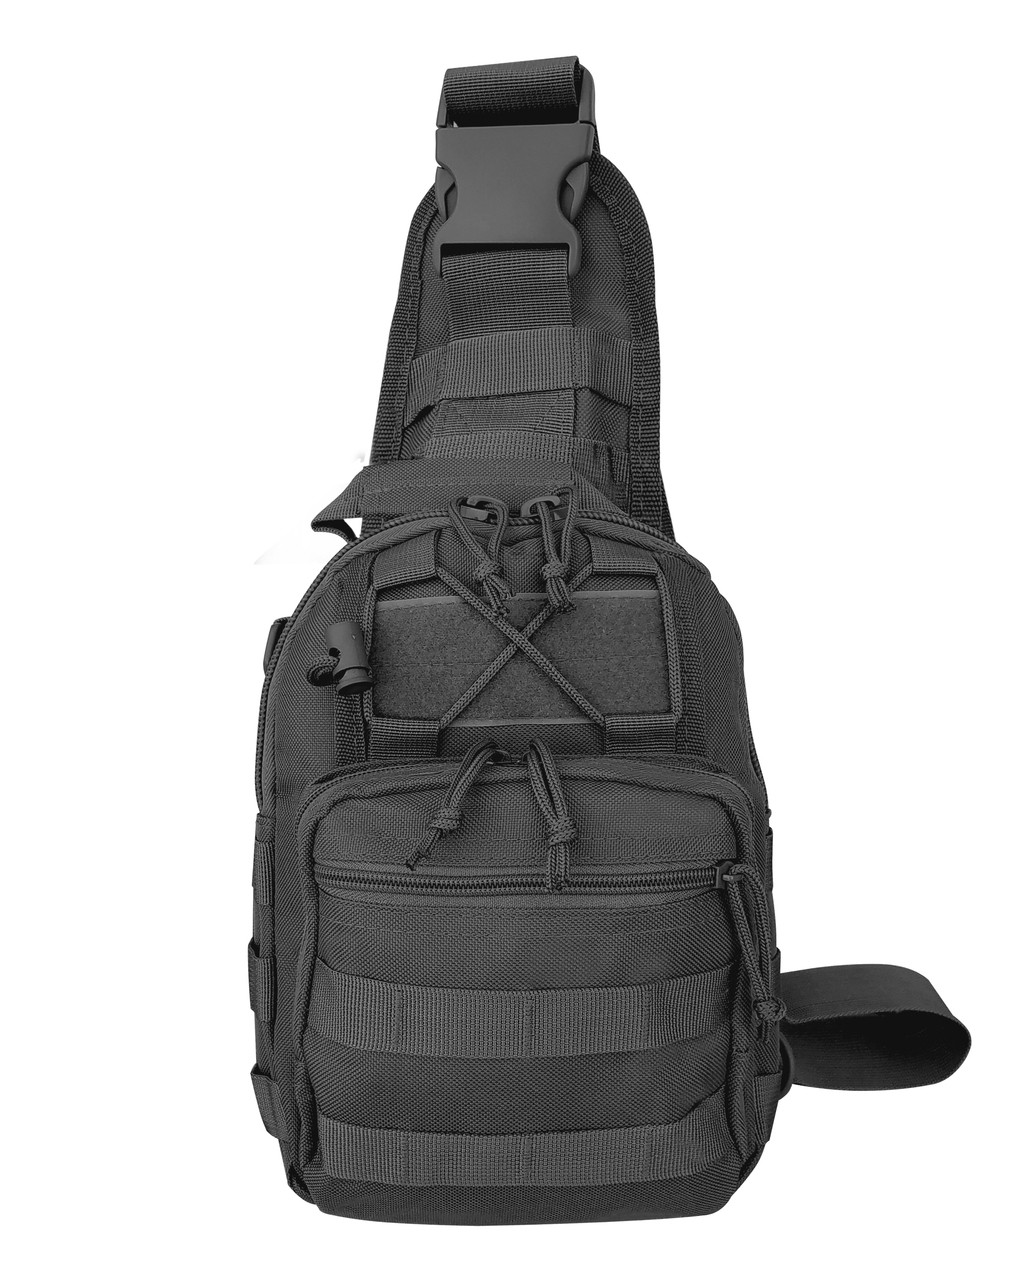 Tactical SLING Go GEAR Bag Gun Concealment Holster Included & B & W Patch 